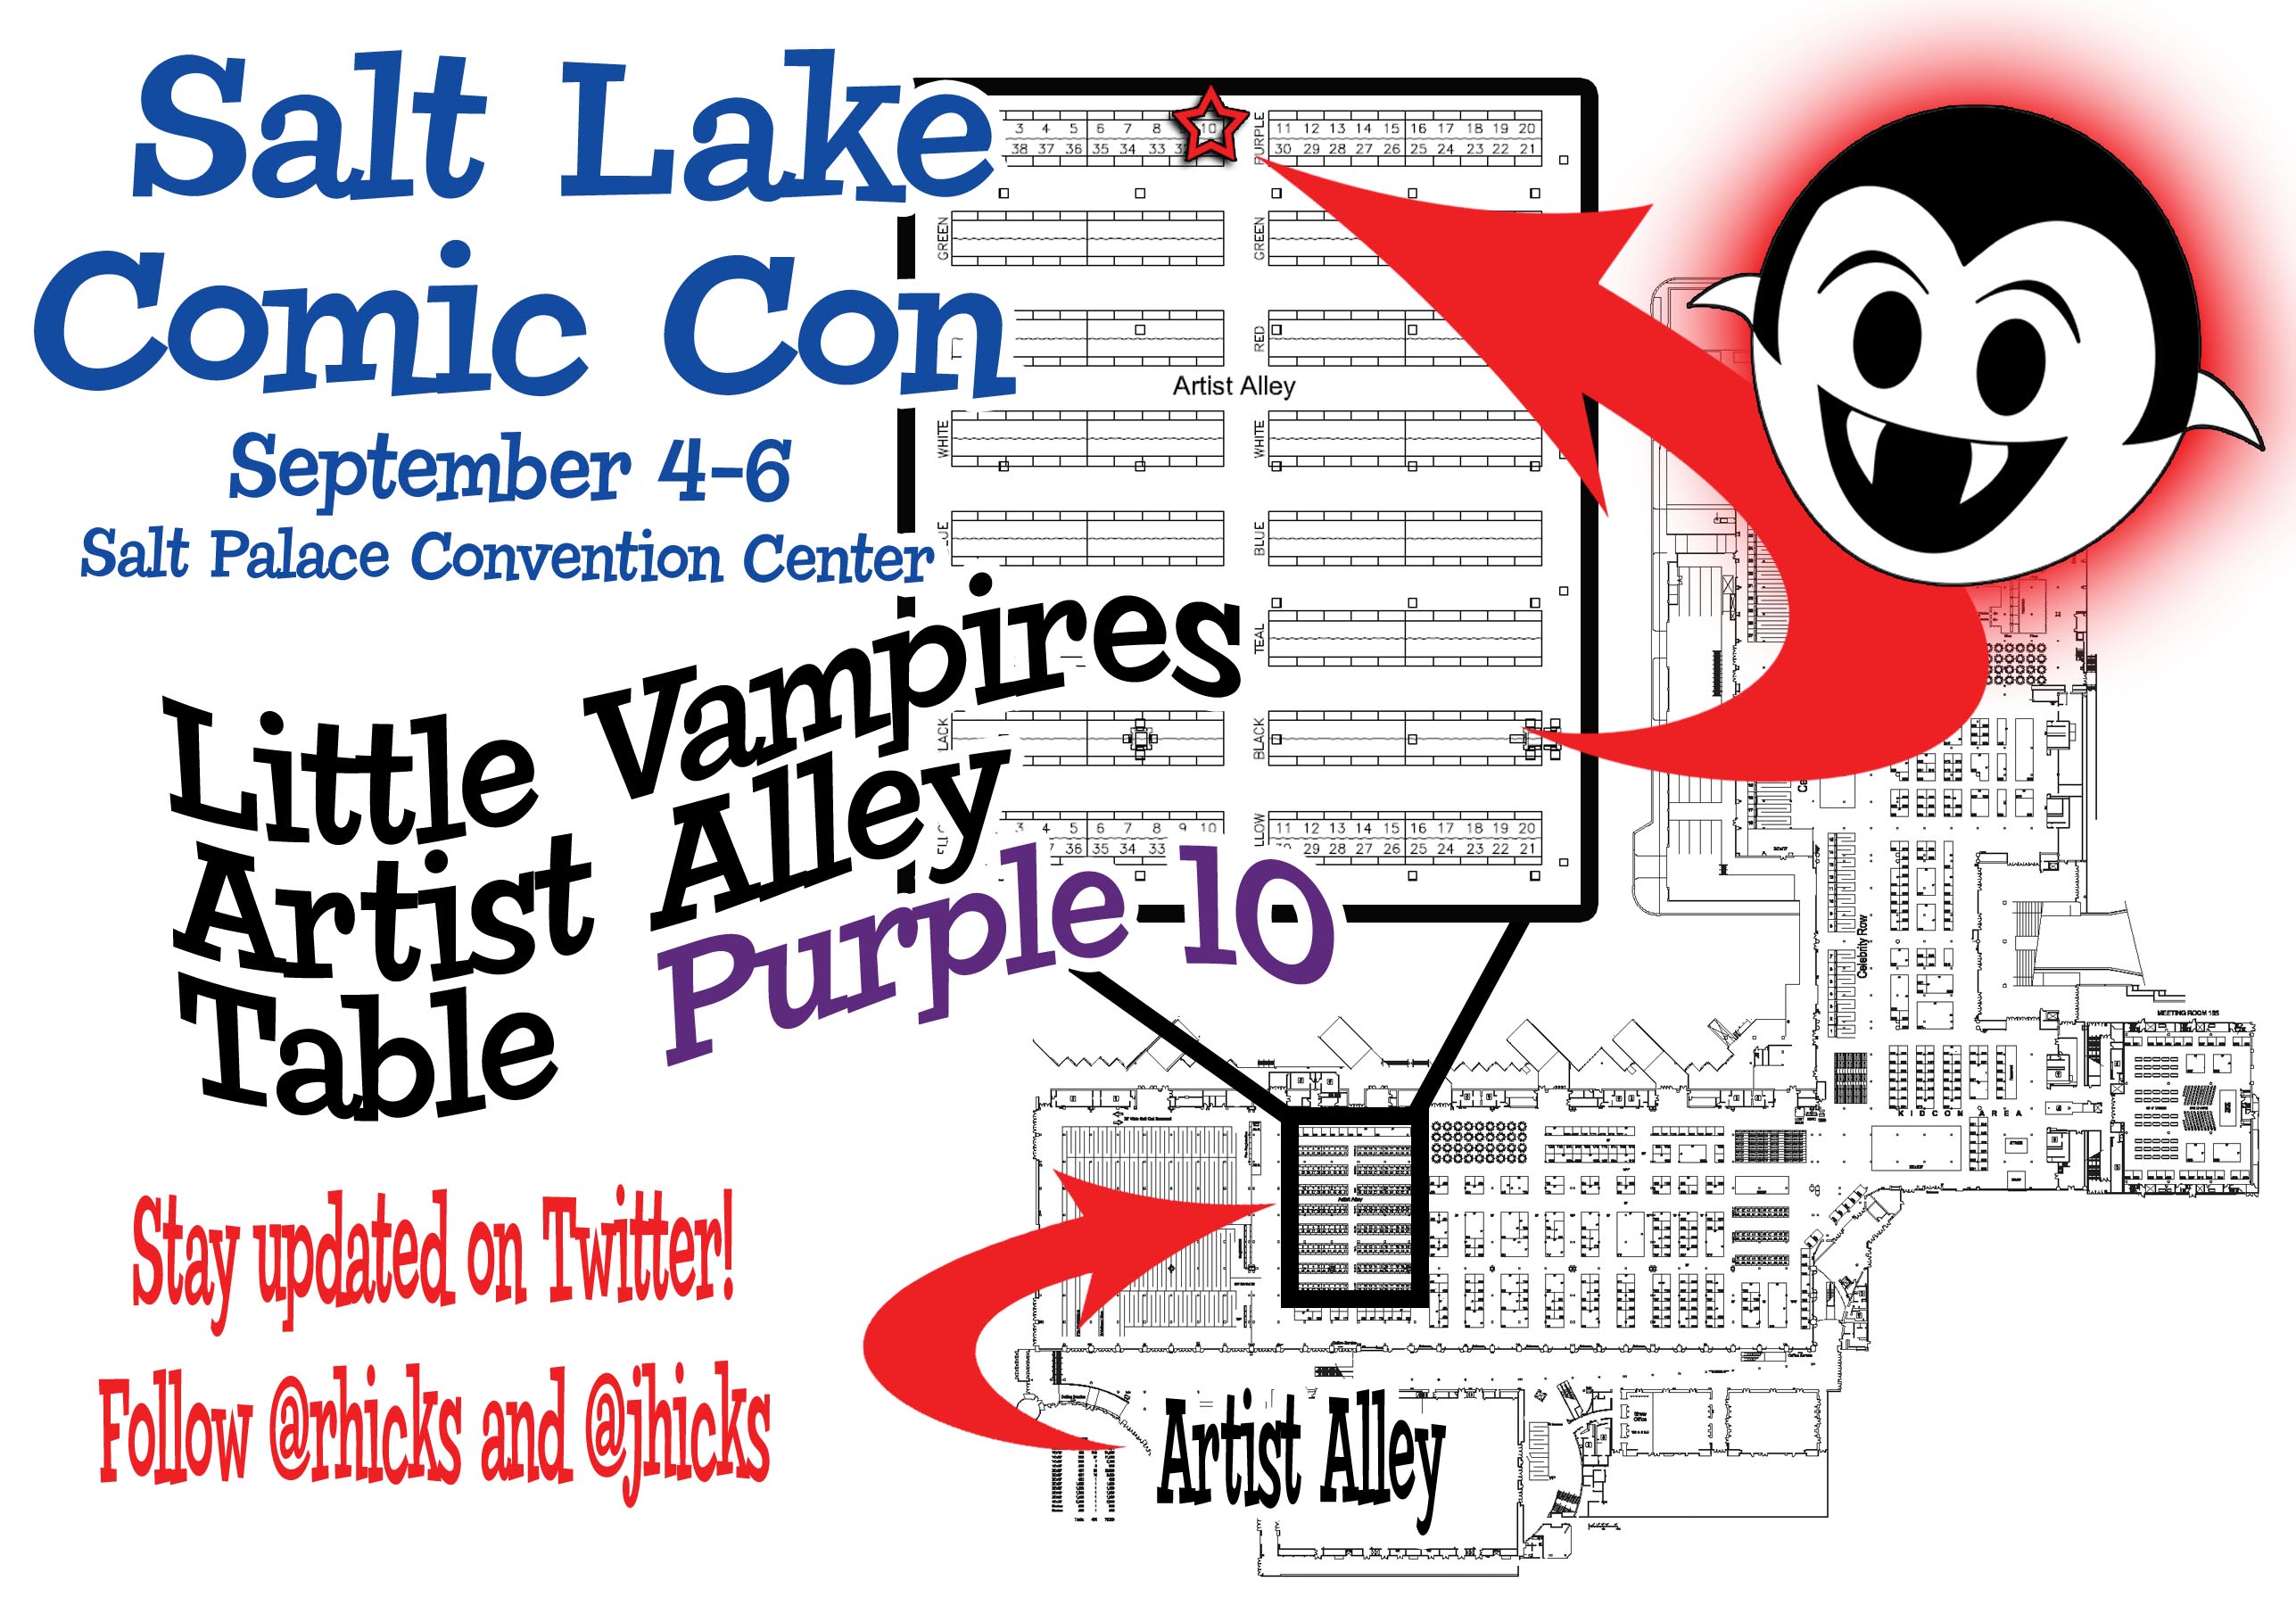 Salt Lake Comic Con 2014 exhibitor floor map with the Little Vampires table highlighted